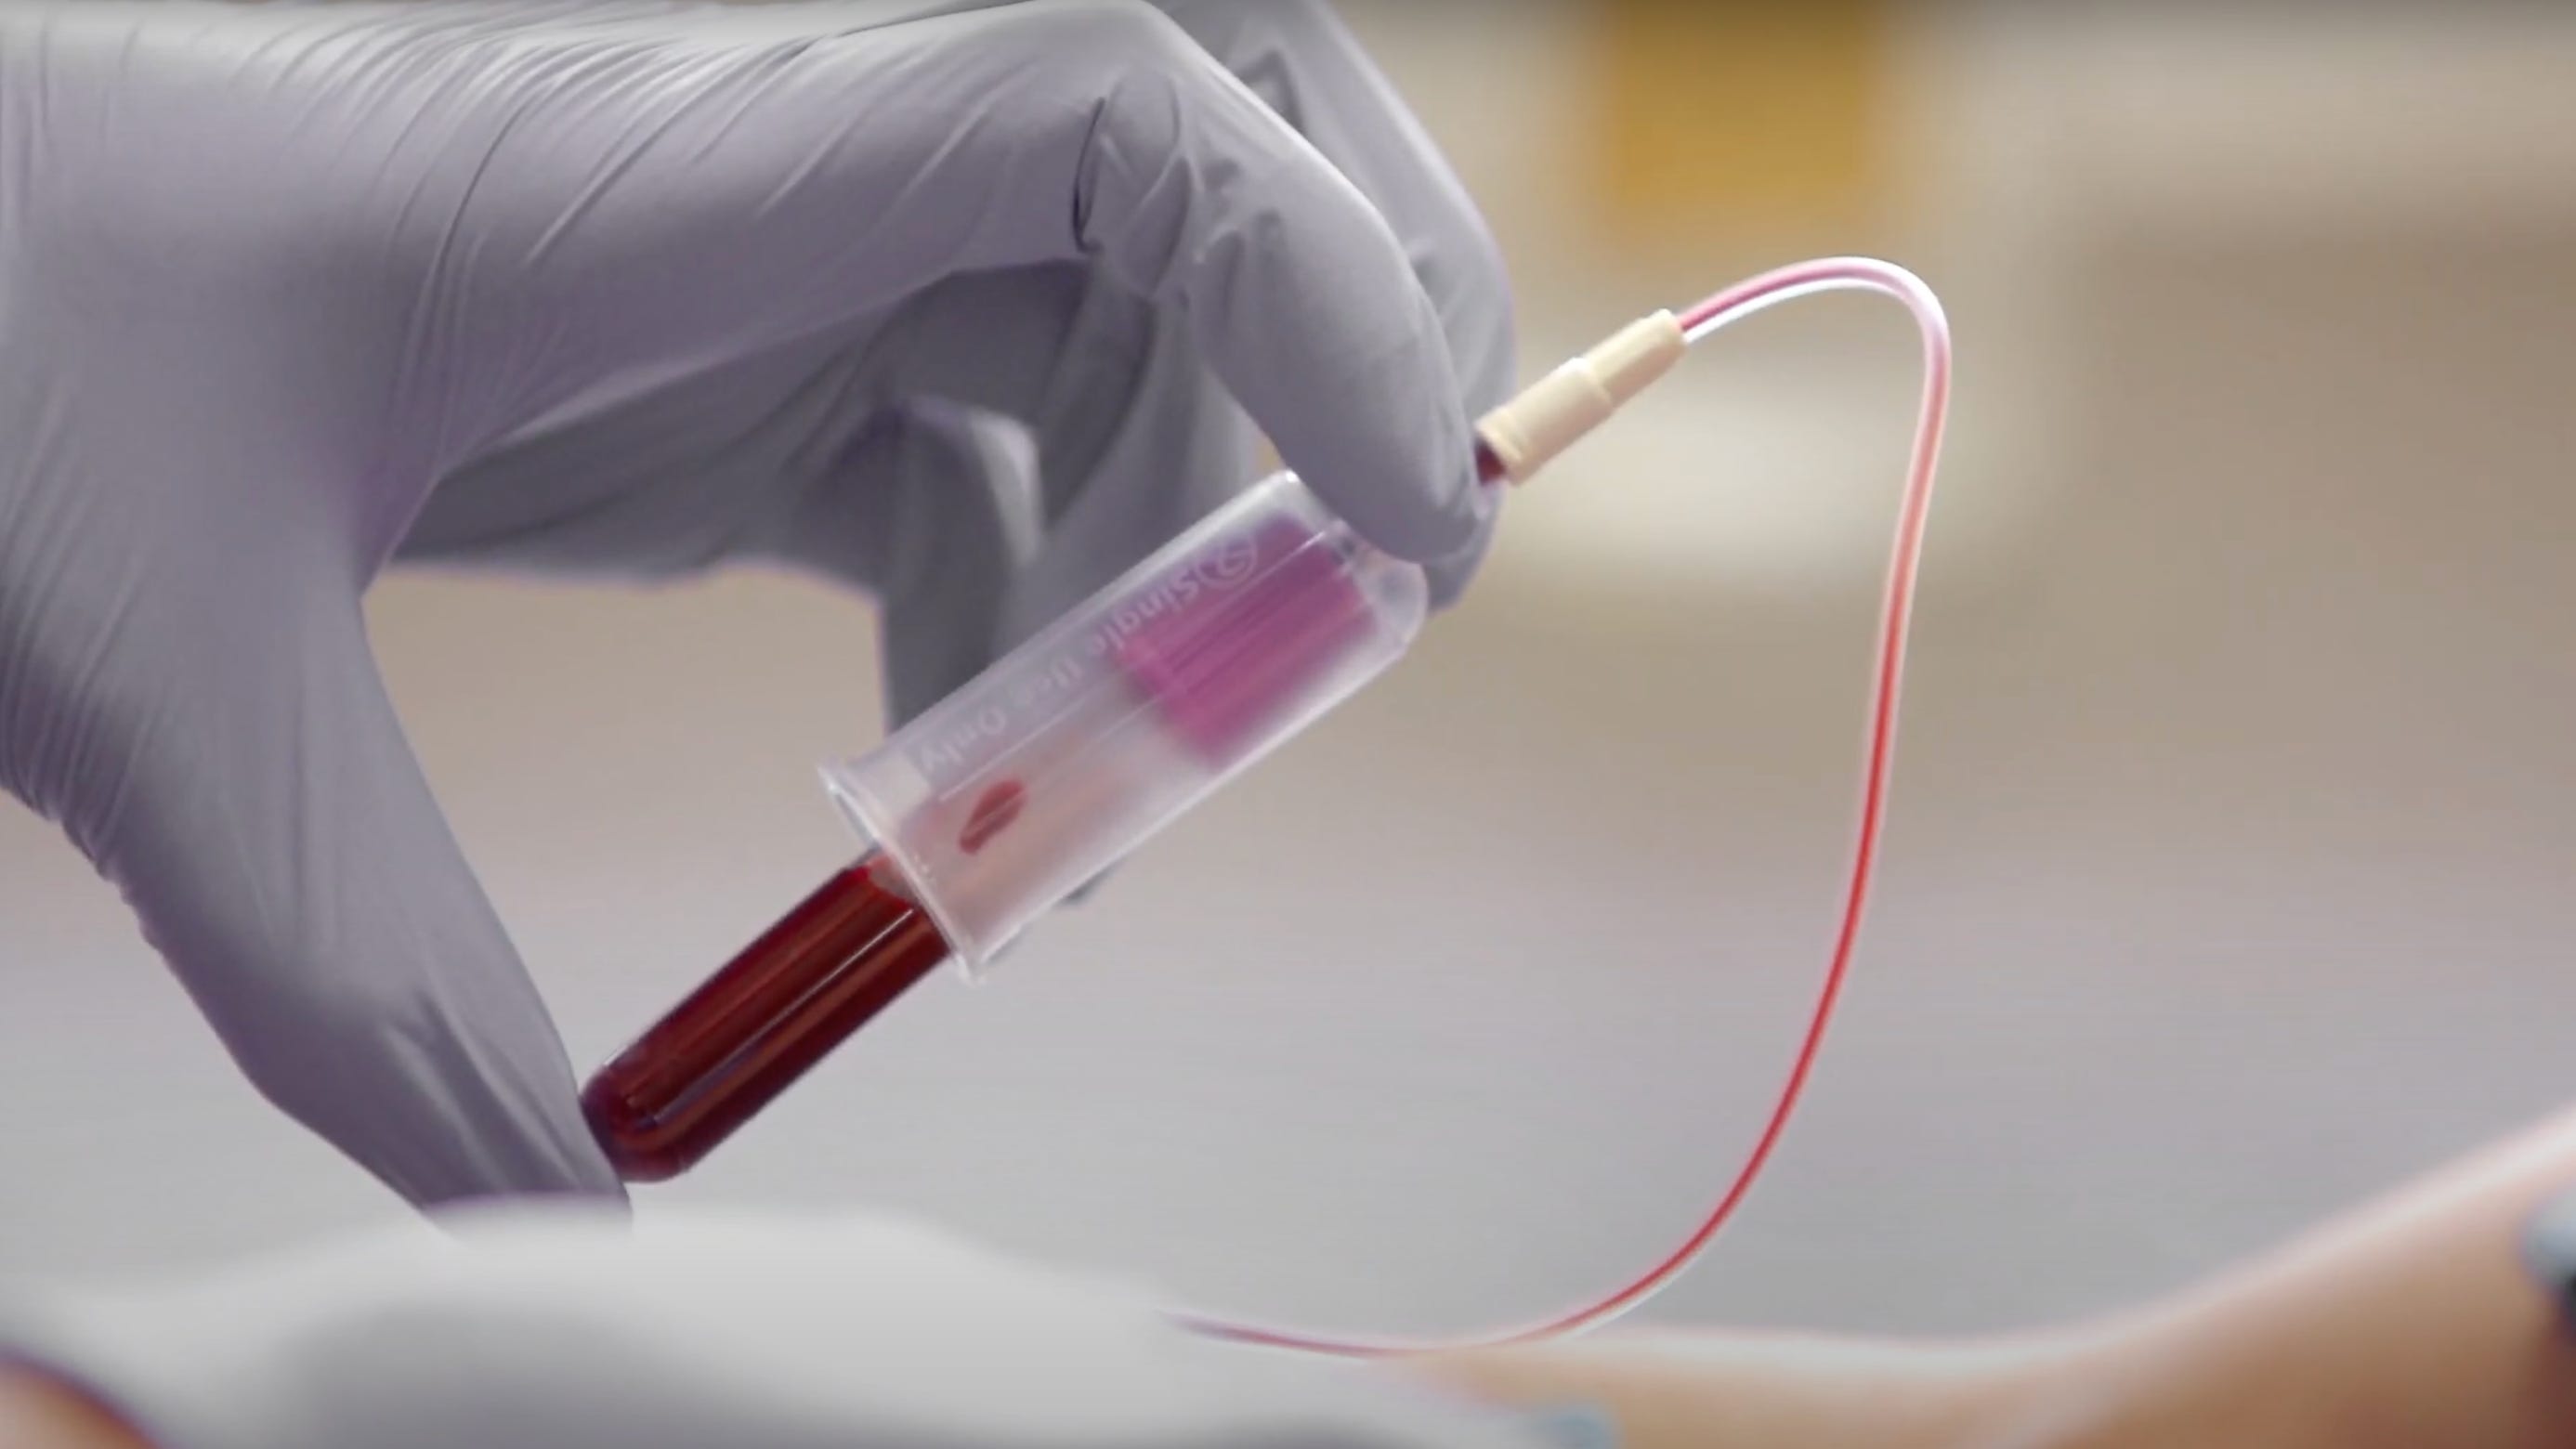 Cancer: FDA approves liquid biopsy tests that can improve treatment